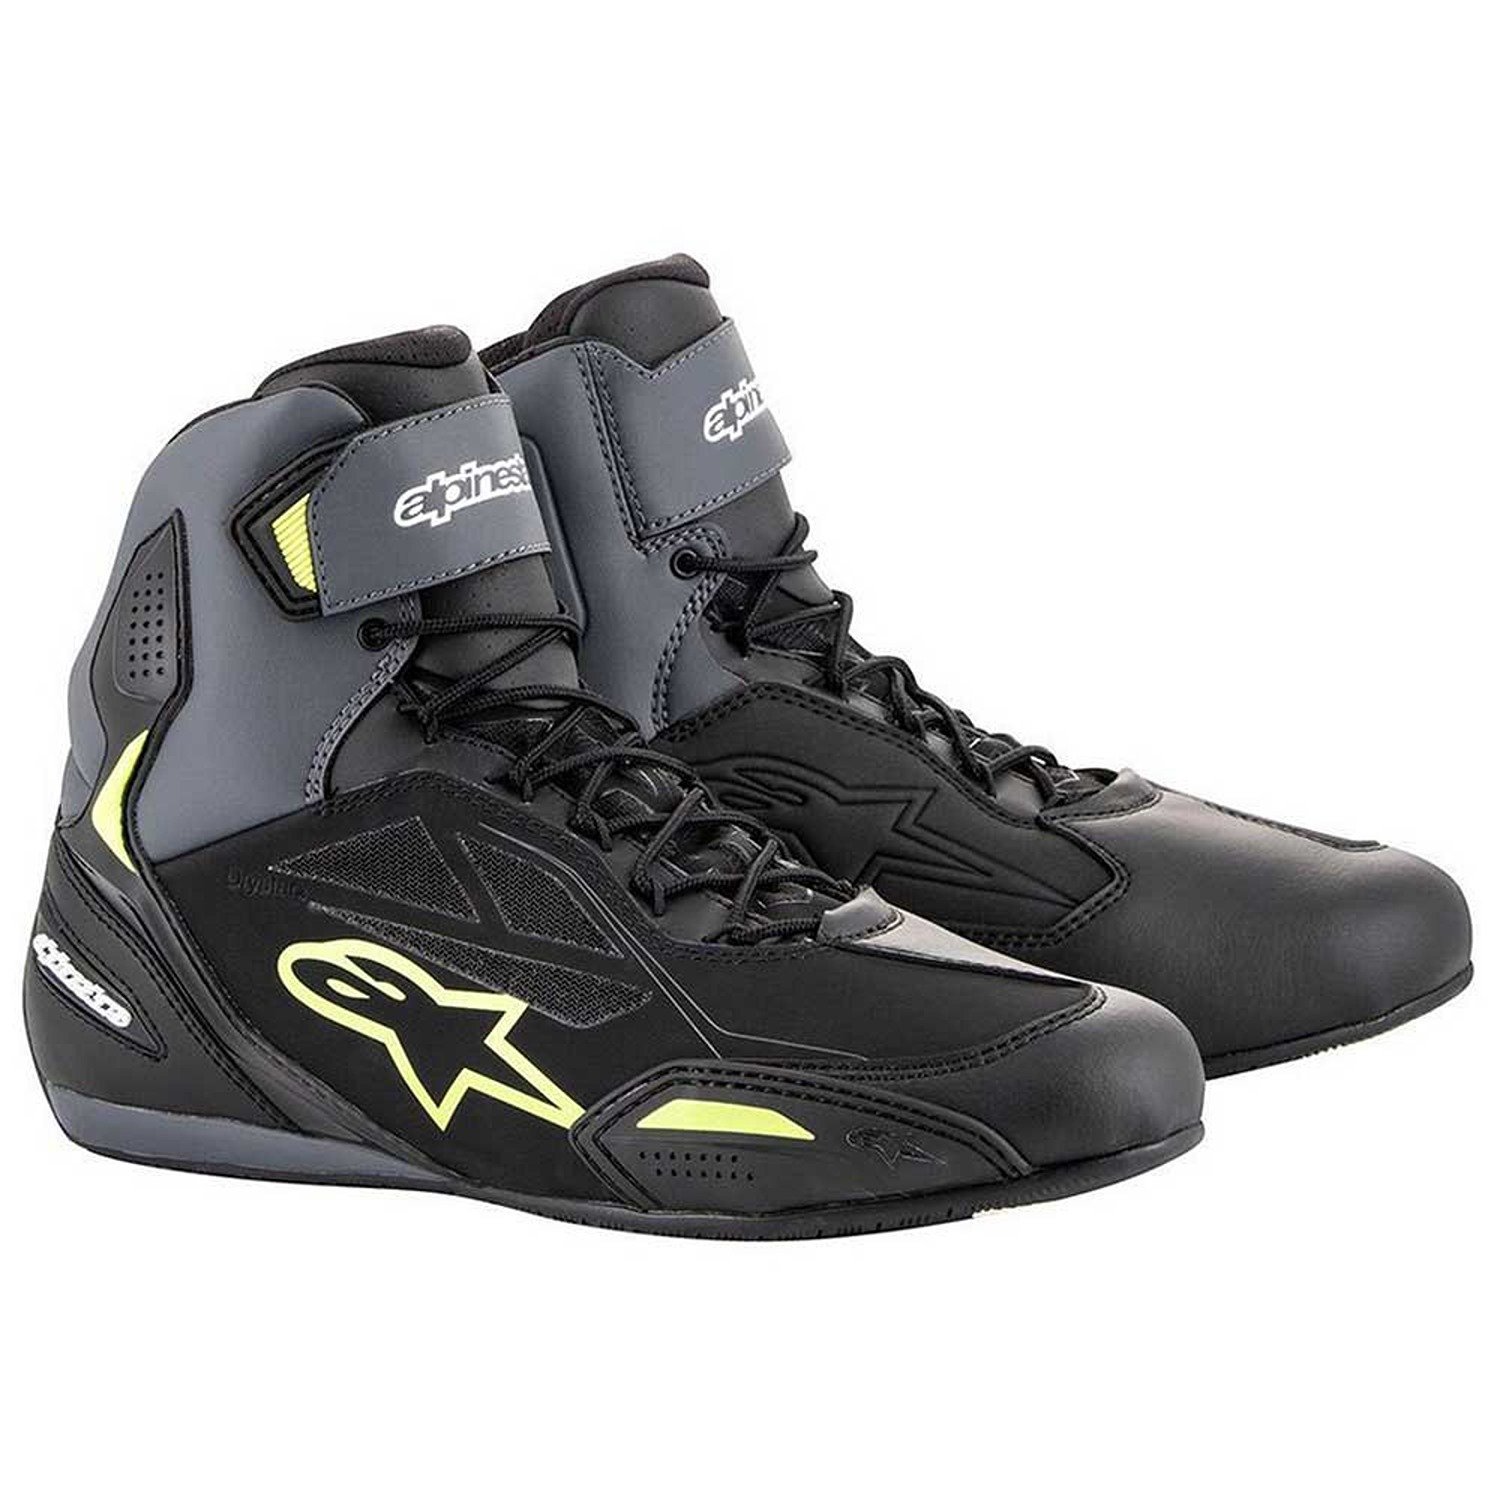 Image of Alpinestars Faster-3 Shoes Black Yellow Fluo Größe US 6